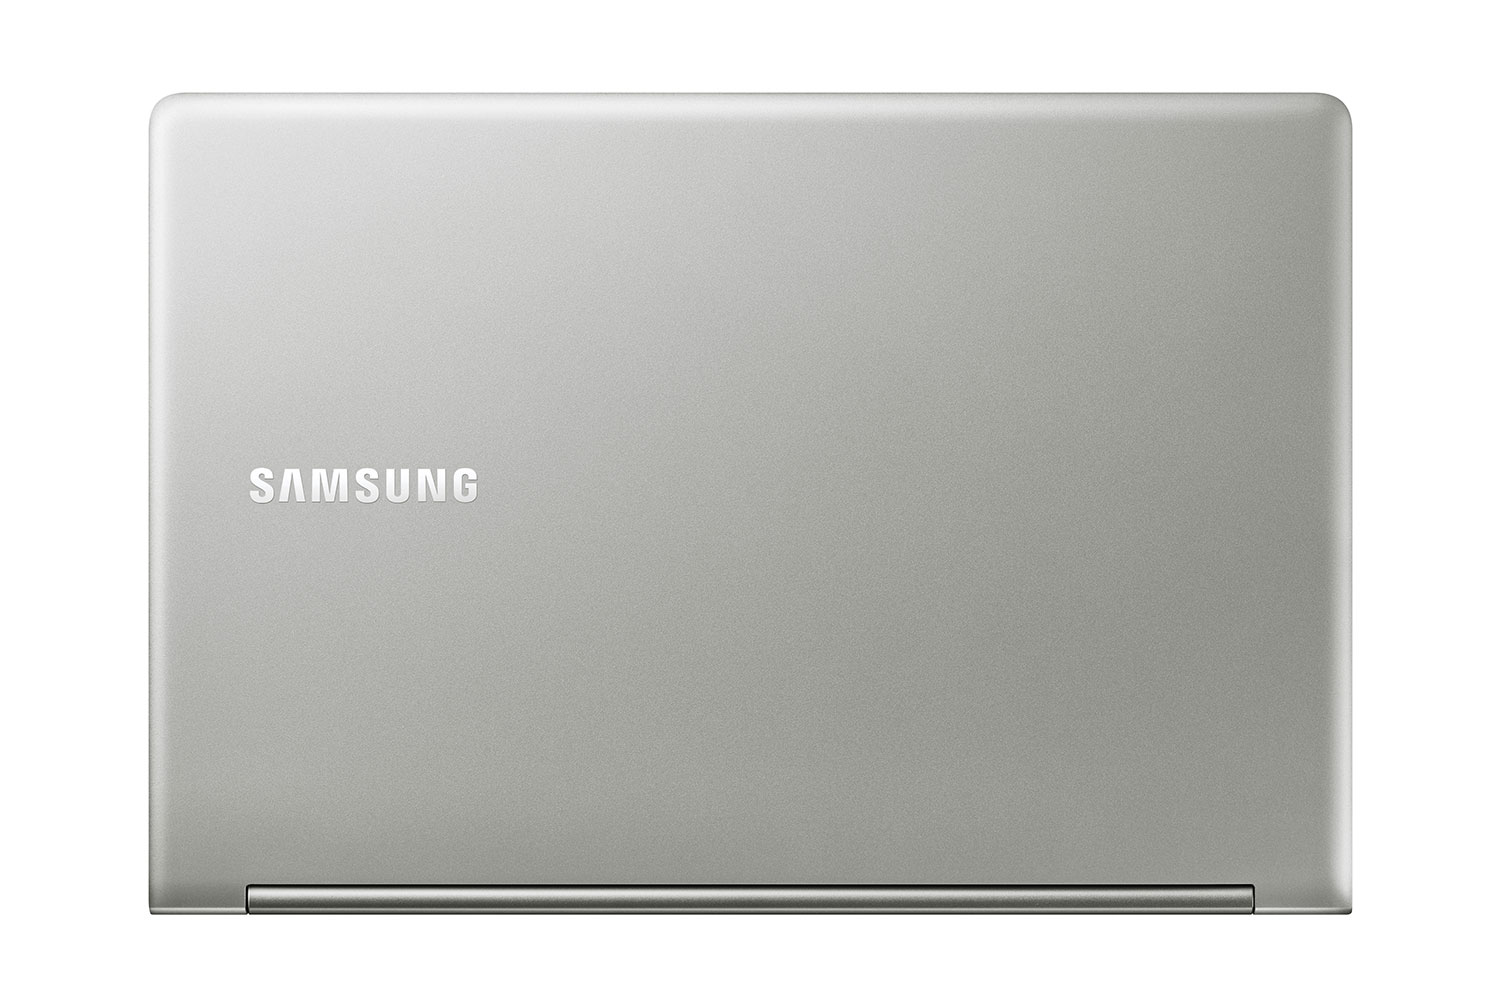 samsung debuts new galaxy tabpro s 2 in 1 book 9 laptops at ces 2016 15 6